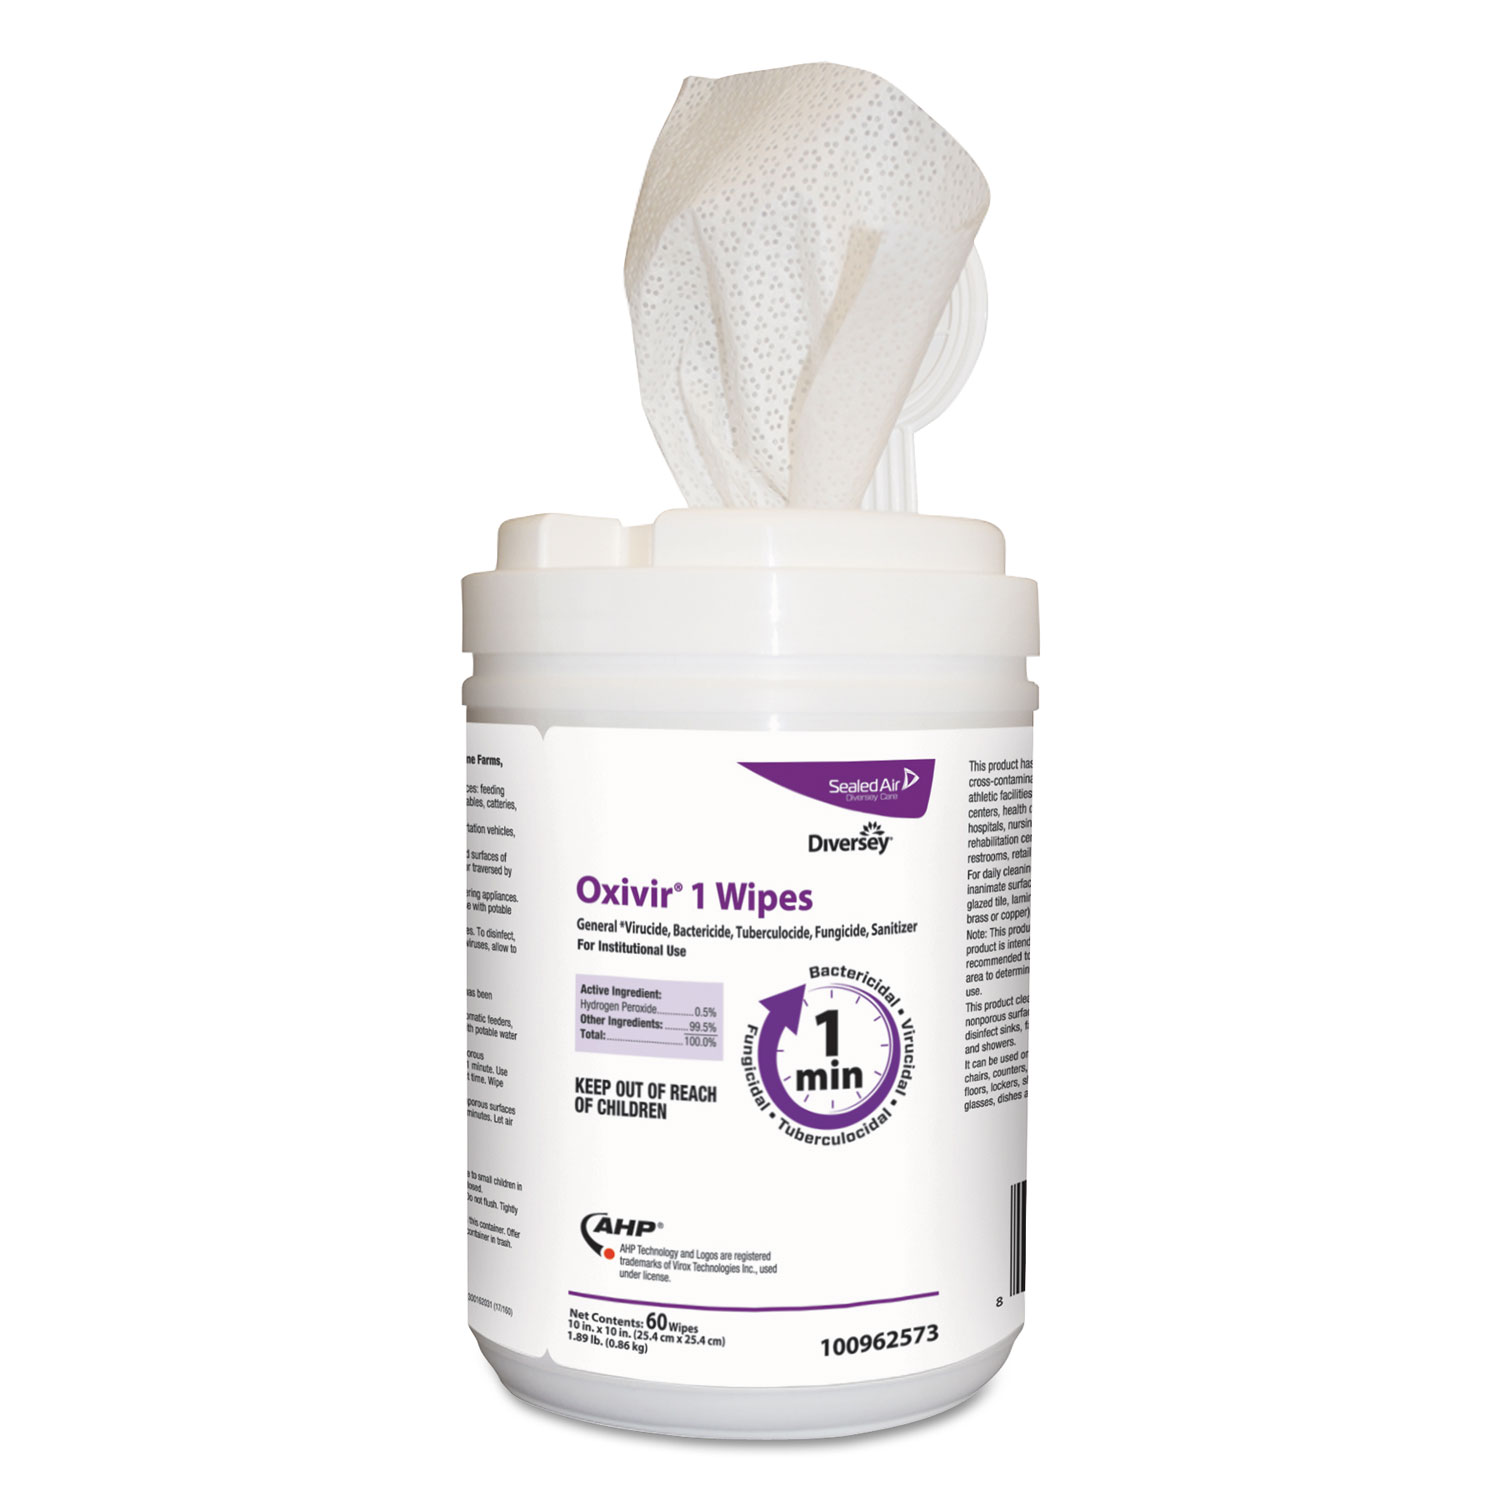 Oxivir 1 Wipes, Characteristic Scent, 10" x 10", 60 Wipes